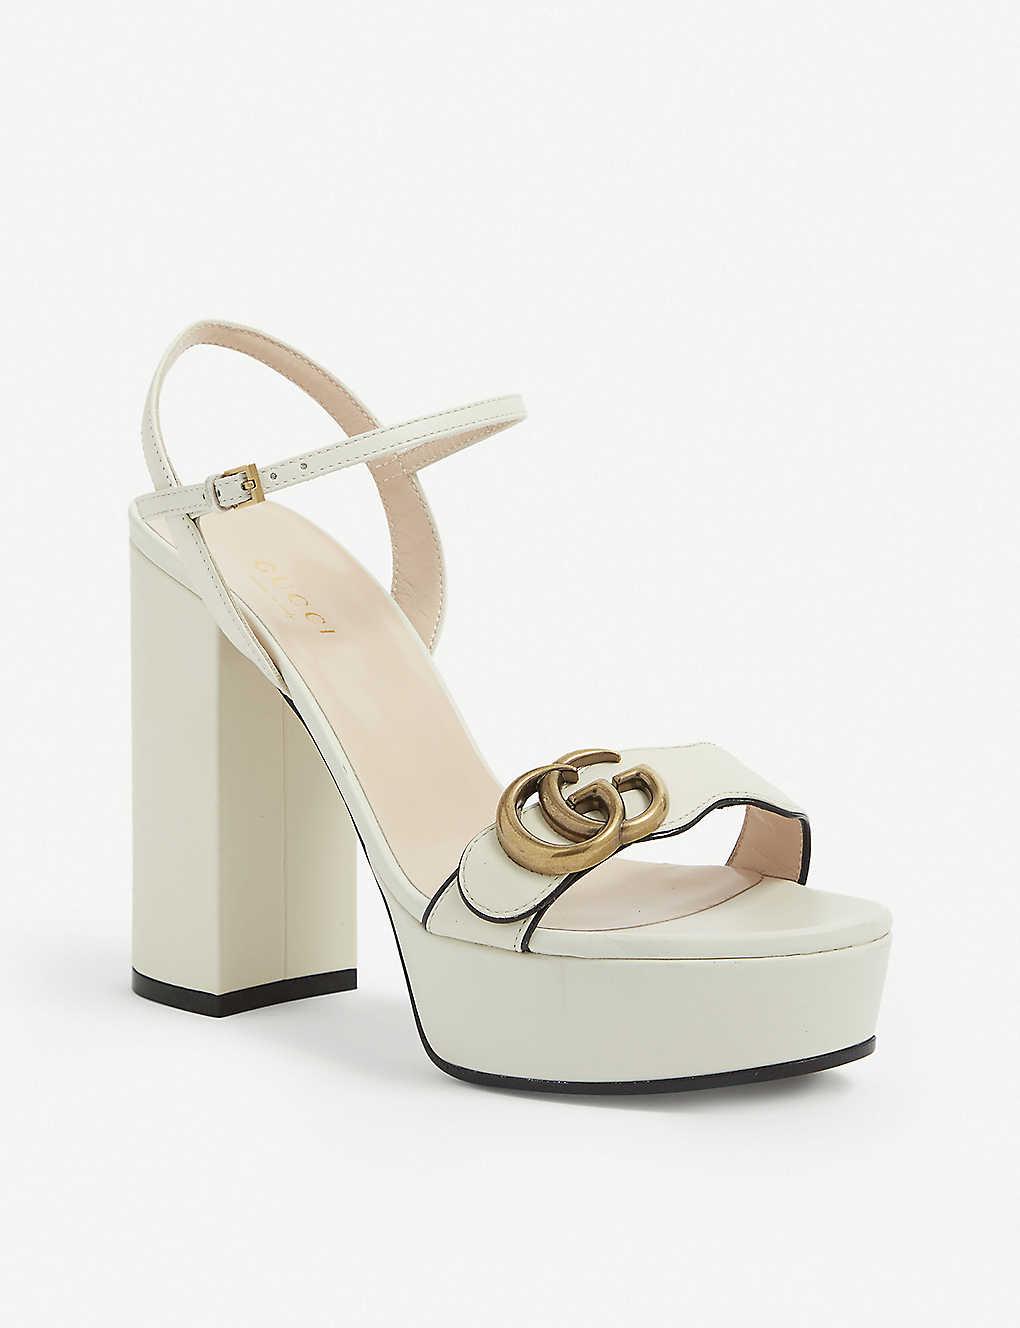 Gucci Marmont 55 Platform Sandal in White | Lyst